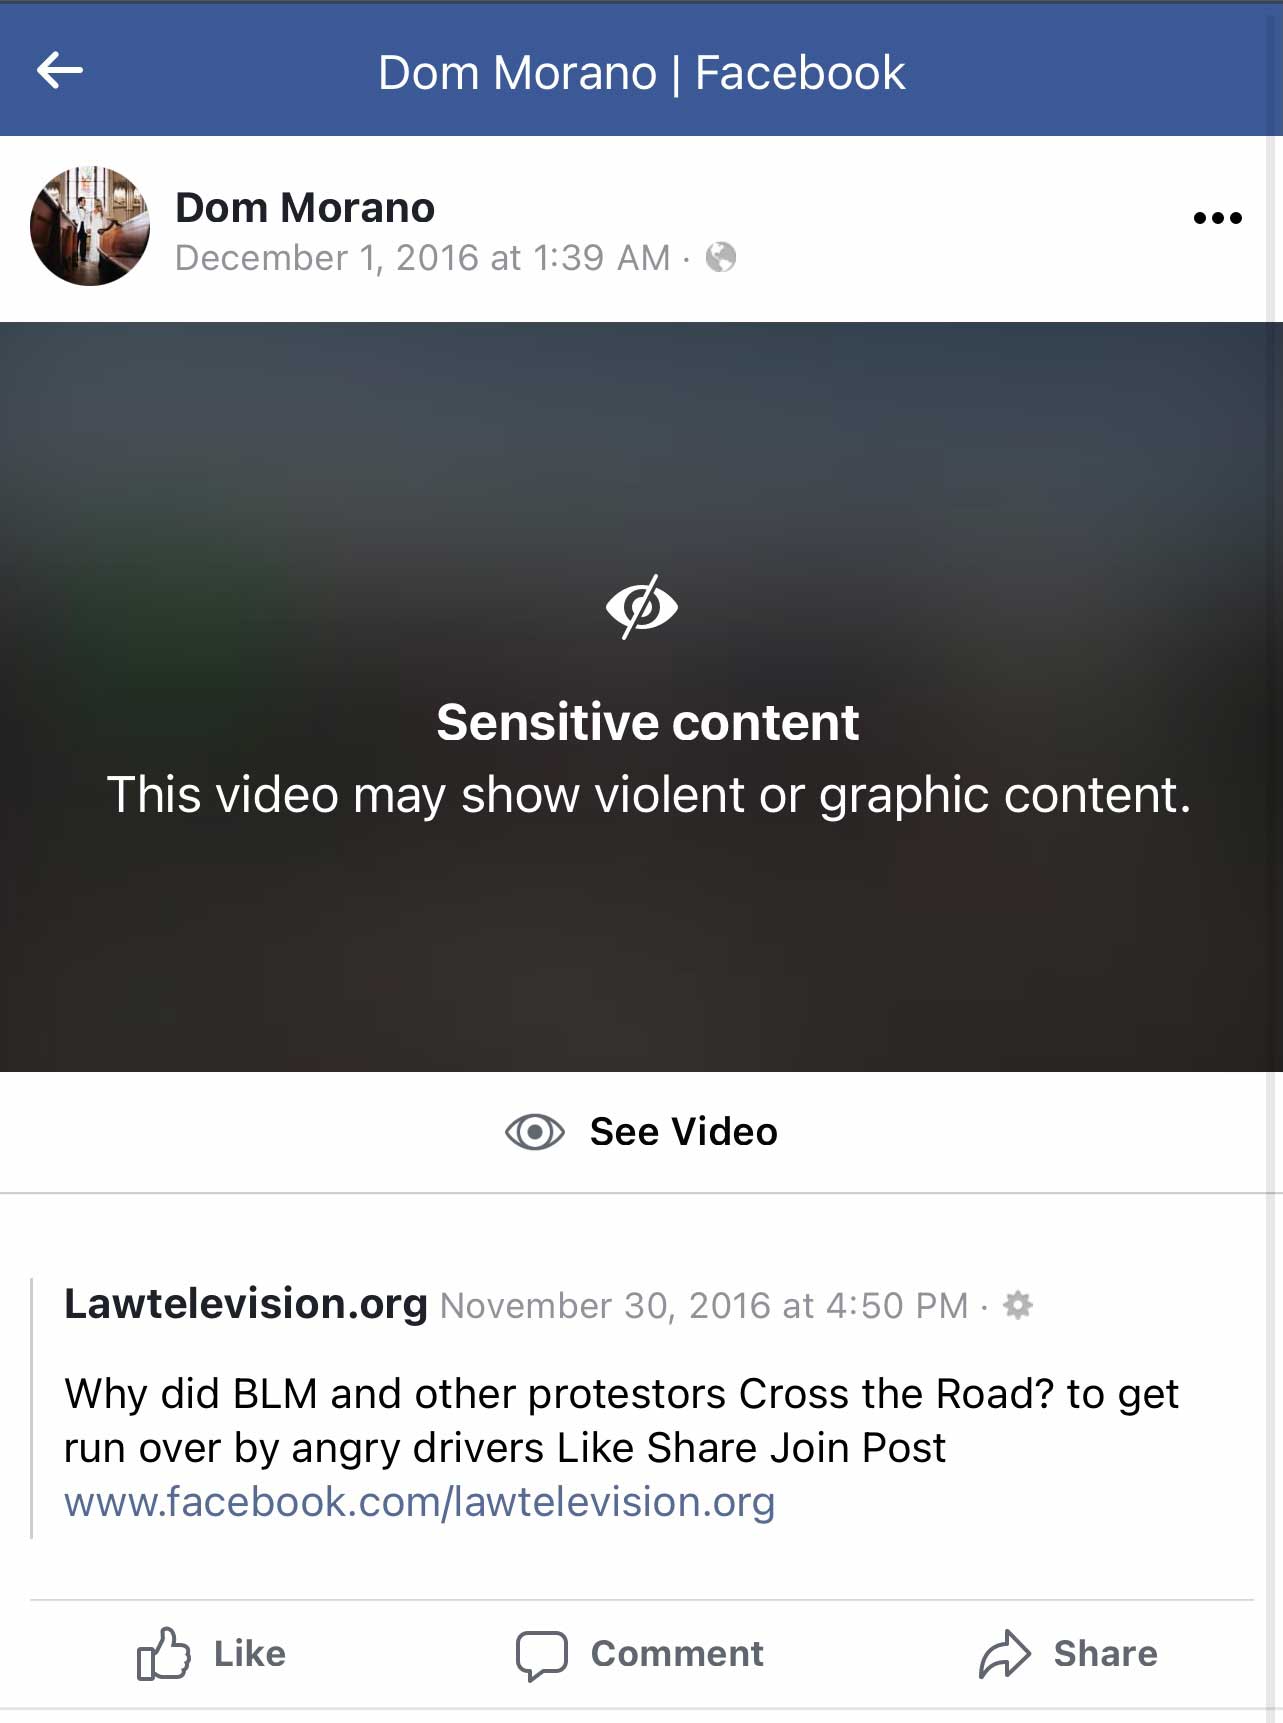 Screenshot of Prince Street Pizza Owner, Dominic Morano’s Facebook repost, featuring a video of Black Lives Matter Protestors getting hit by cars.